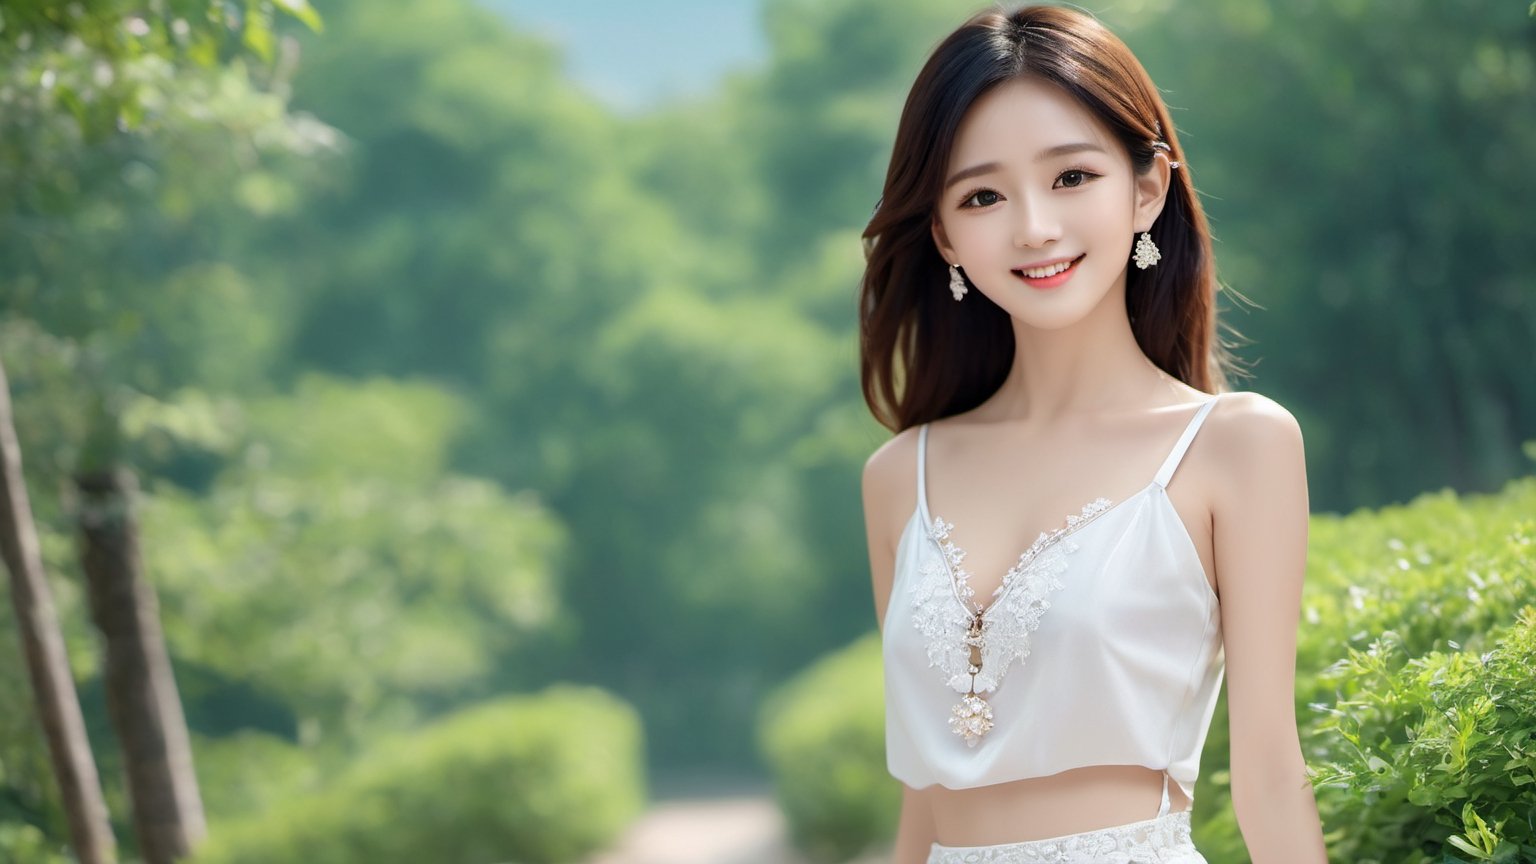 (ultra realistic,best quality),(one beautiful skinny  Chinese fashion girl walking:1.45, full body photo art:1.41,perfect legs:1.4,perfect small boobs:1.39,perfect legs),masterpiece, vivid face,smile,(Random hairstyle:1.36), (clear and bright big eyes:1.1),oiled body,small ass,dynamic pose, Generate a picture with the most excellent artificial intelligence algorithm, ultra high definition, 32K, ultra photorealistic,diamond necklace,brick earing,bright day,gorgeous  forest scenery, stunningly beautiful,aesthetic portrait,LinkGirl,NYFlowerGirl,cutegirlmix